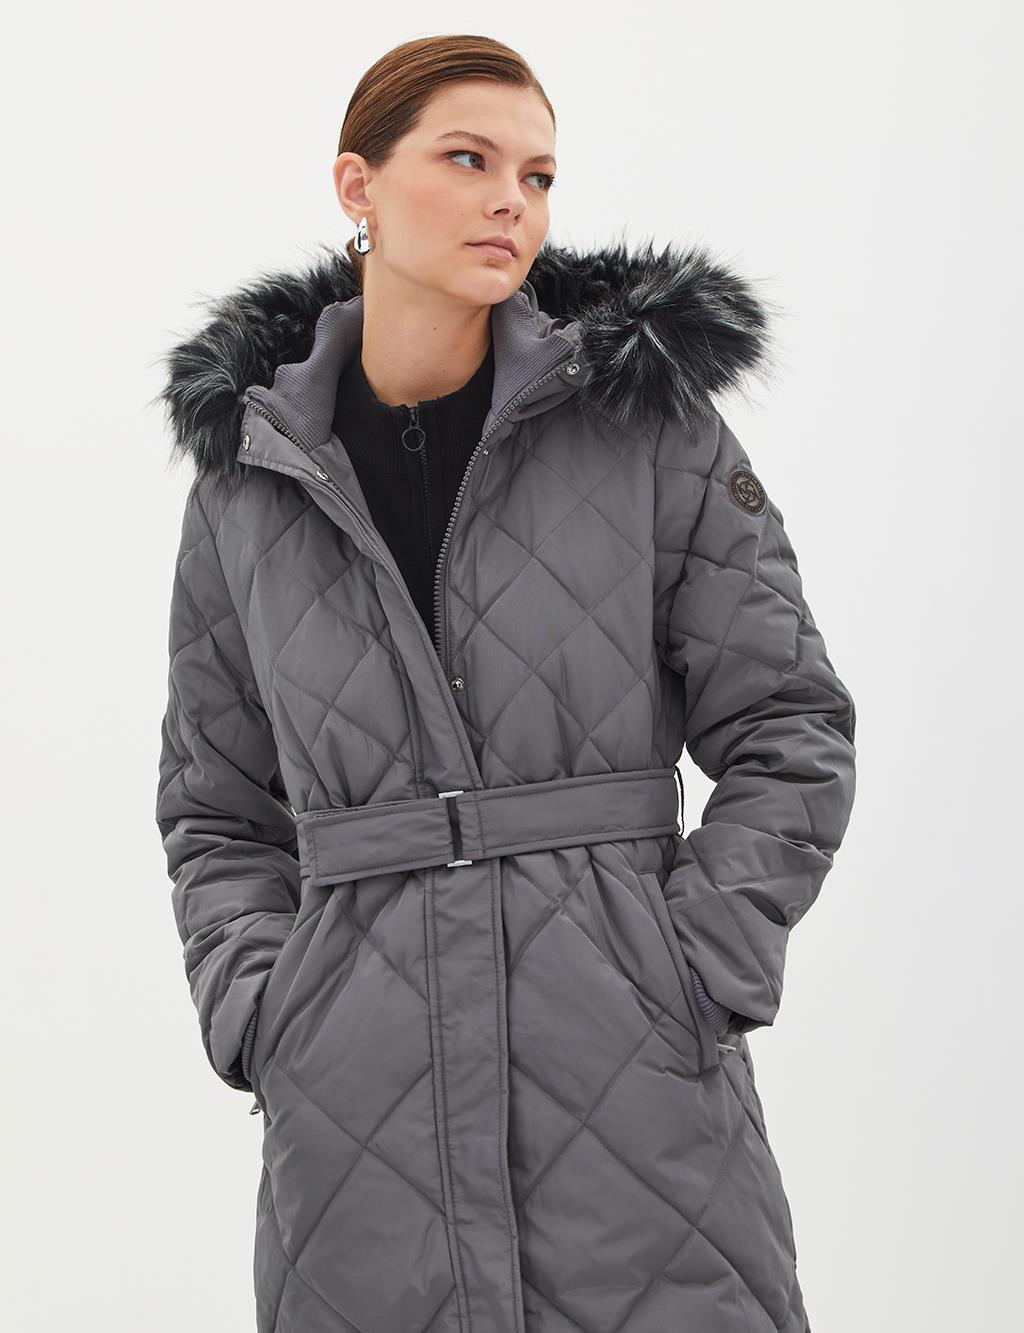 Diamond Patterned Faux Fur Goose Down Coat Smoked